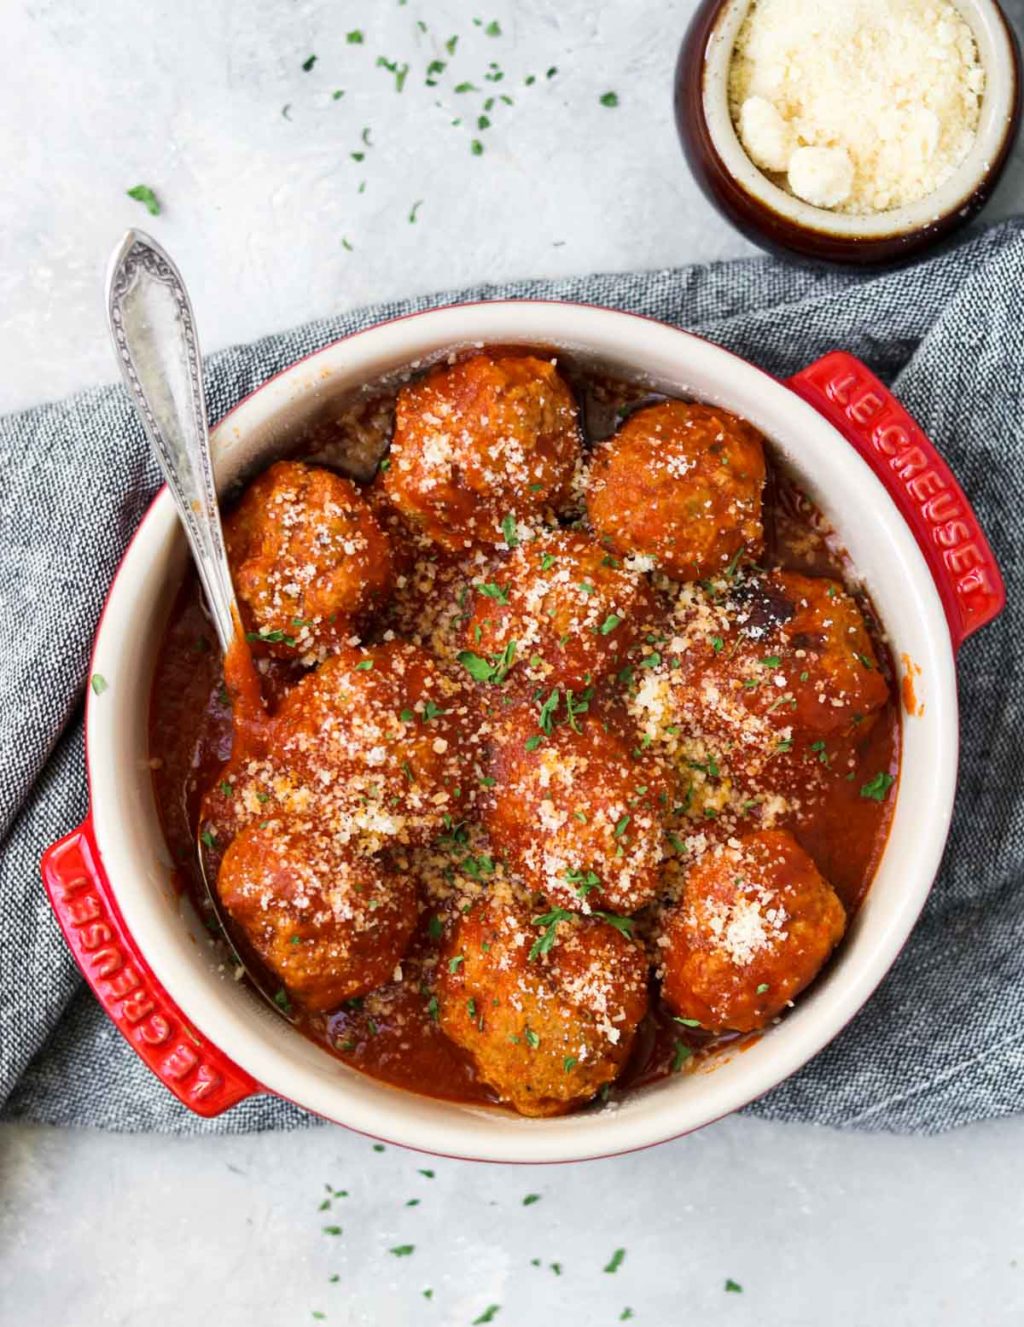 Turkey meatballs in a red dish garnished with parmesan cheese and parsley